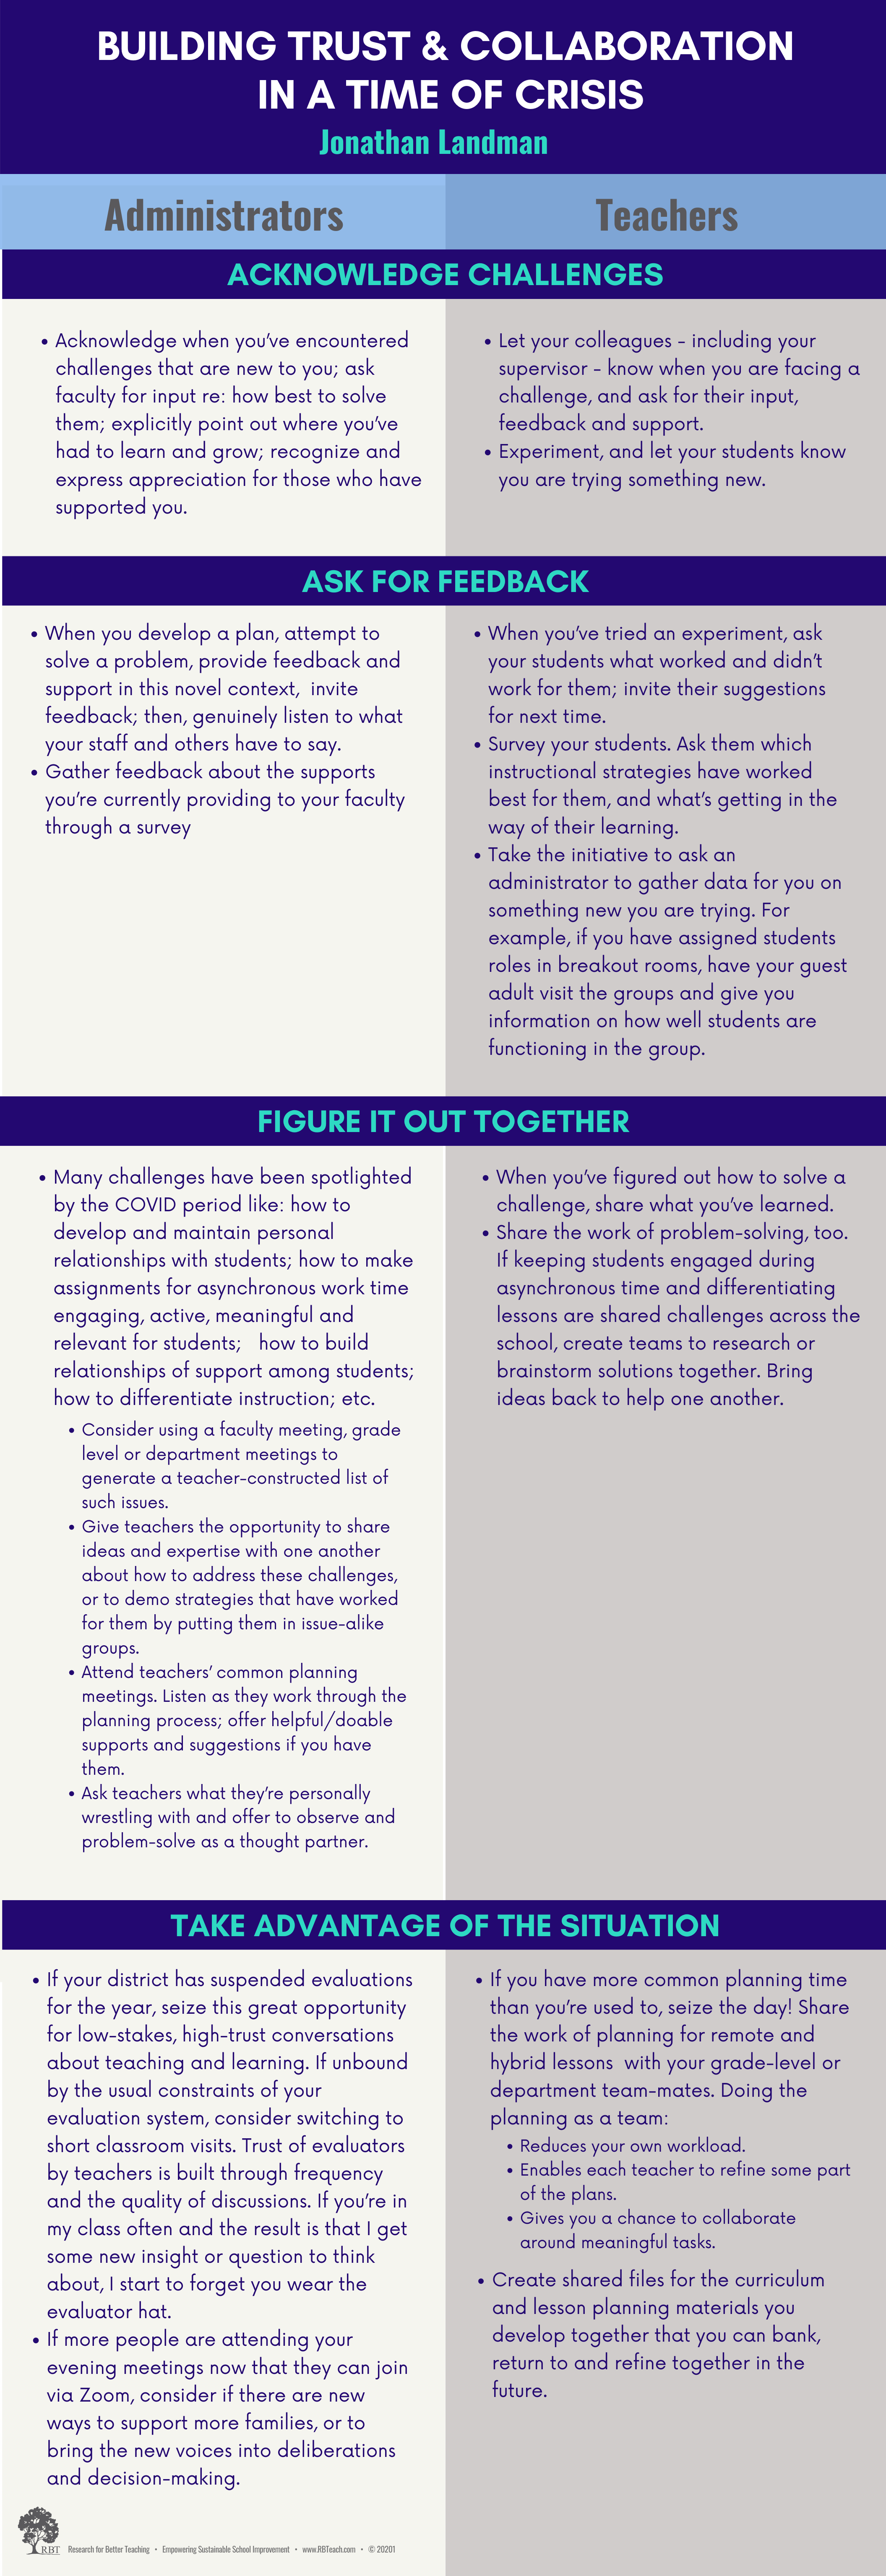 Ways to Build Collaboration and Trust copy.png